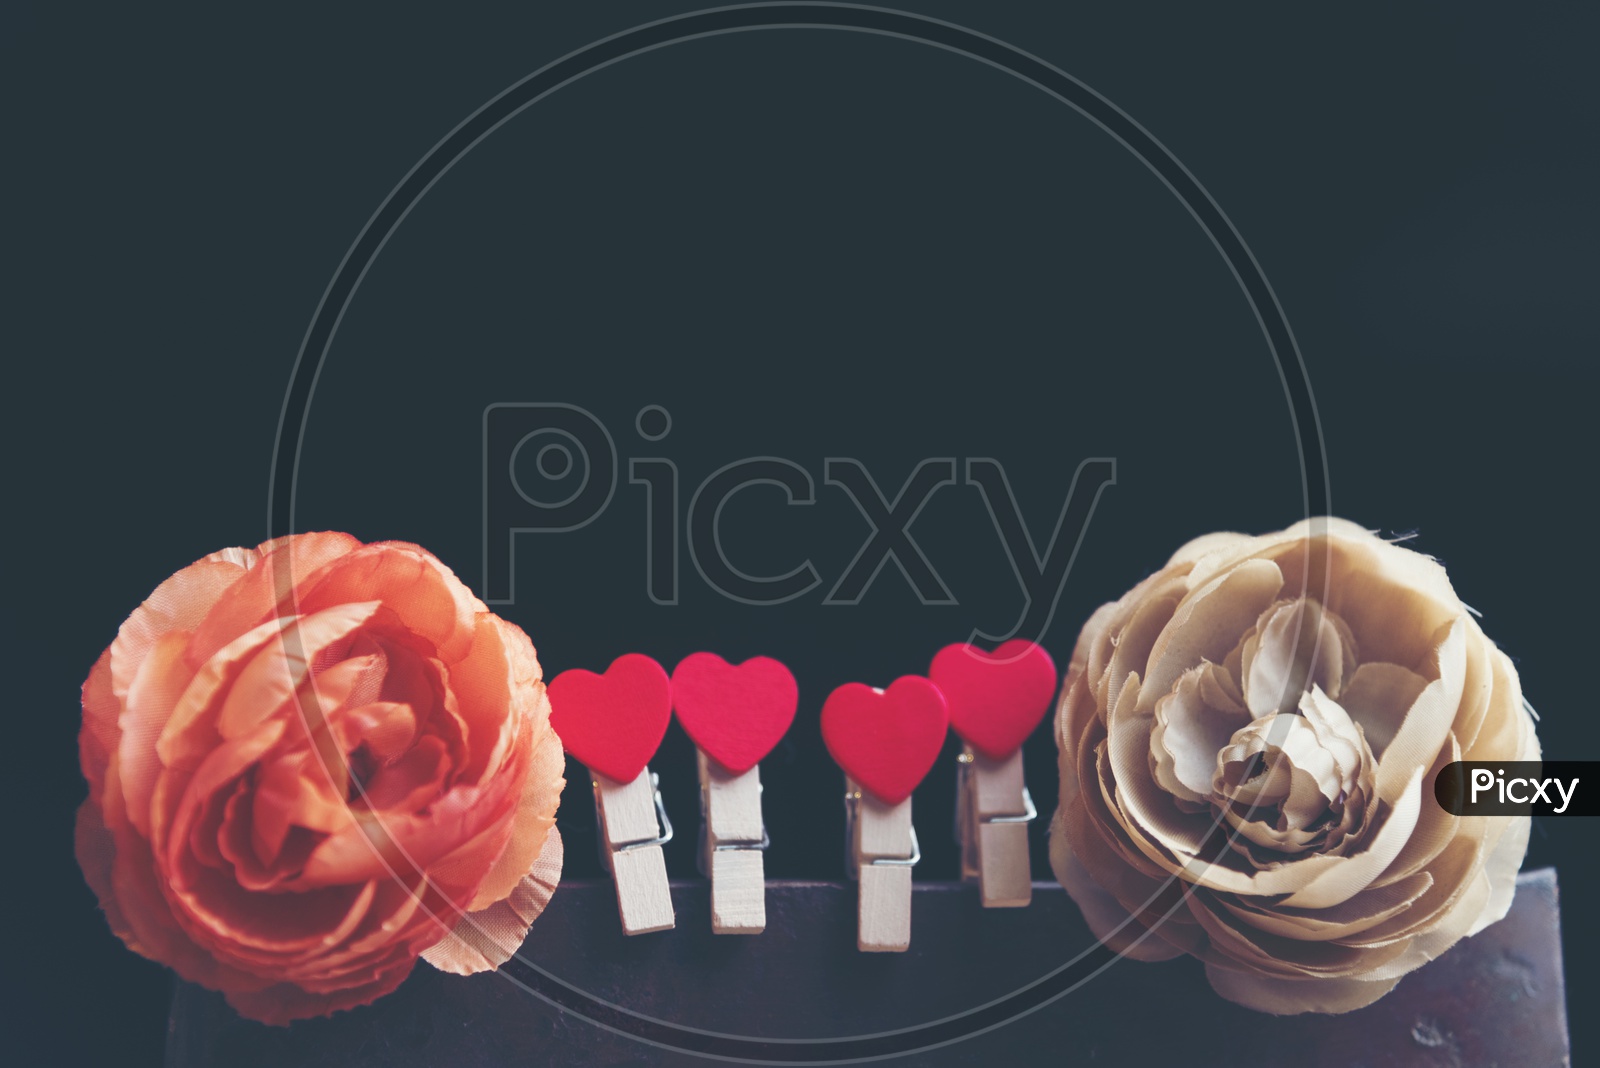 Rose Flowers And Red Hearts For Valentines Day Love  Concept  On an Isolated Black Background With Vintage Filter